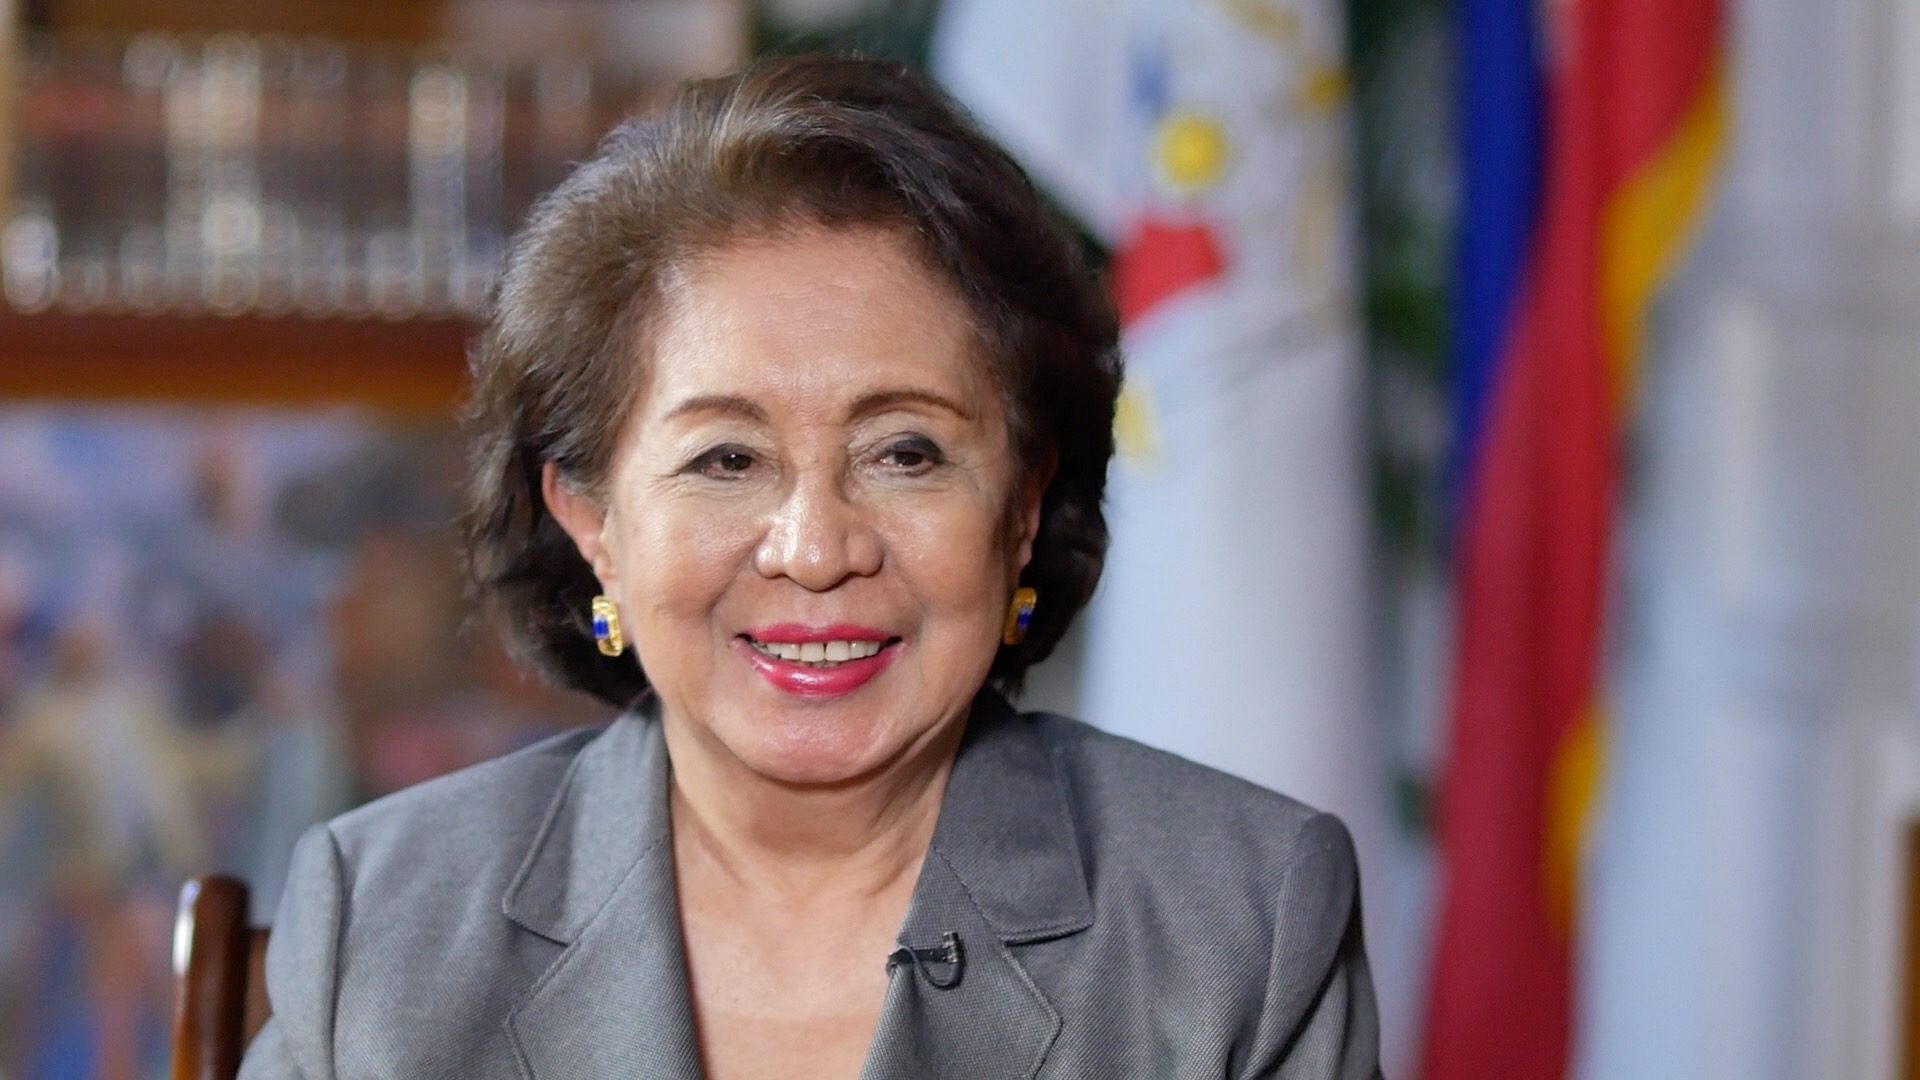 Ombudsman Morales: No plans to run for any position